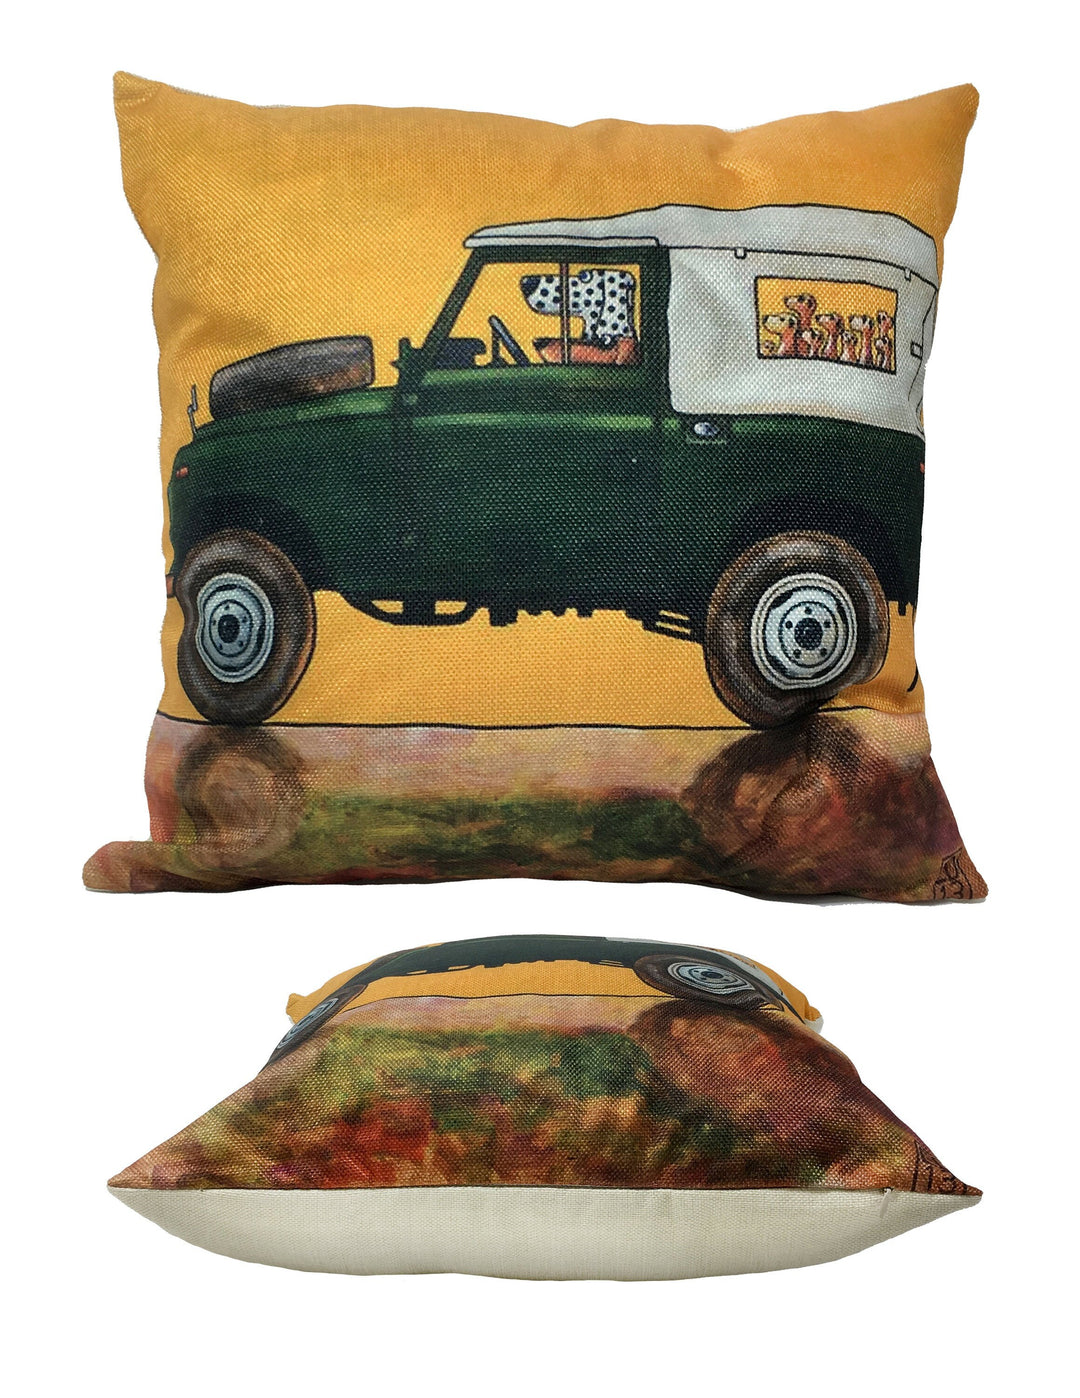 FREE SHIPPING / Boho Chic Mid Century Decorative Pillow Cover, Modern Car Design Midcentury Farmhouse Pillowcases, Throw, Accent Pillow